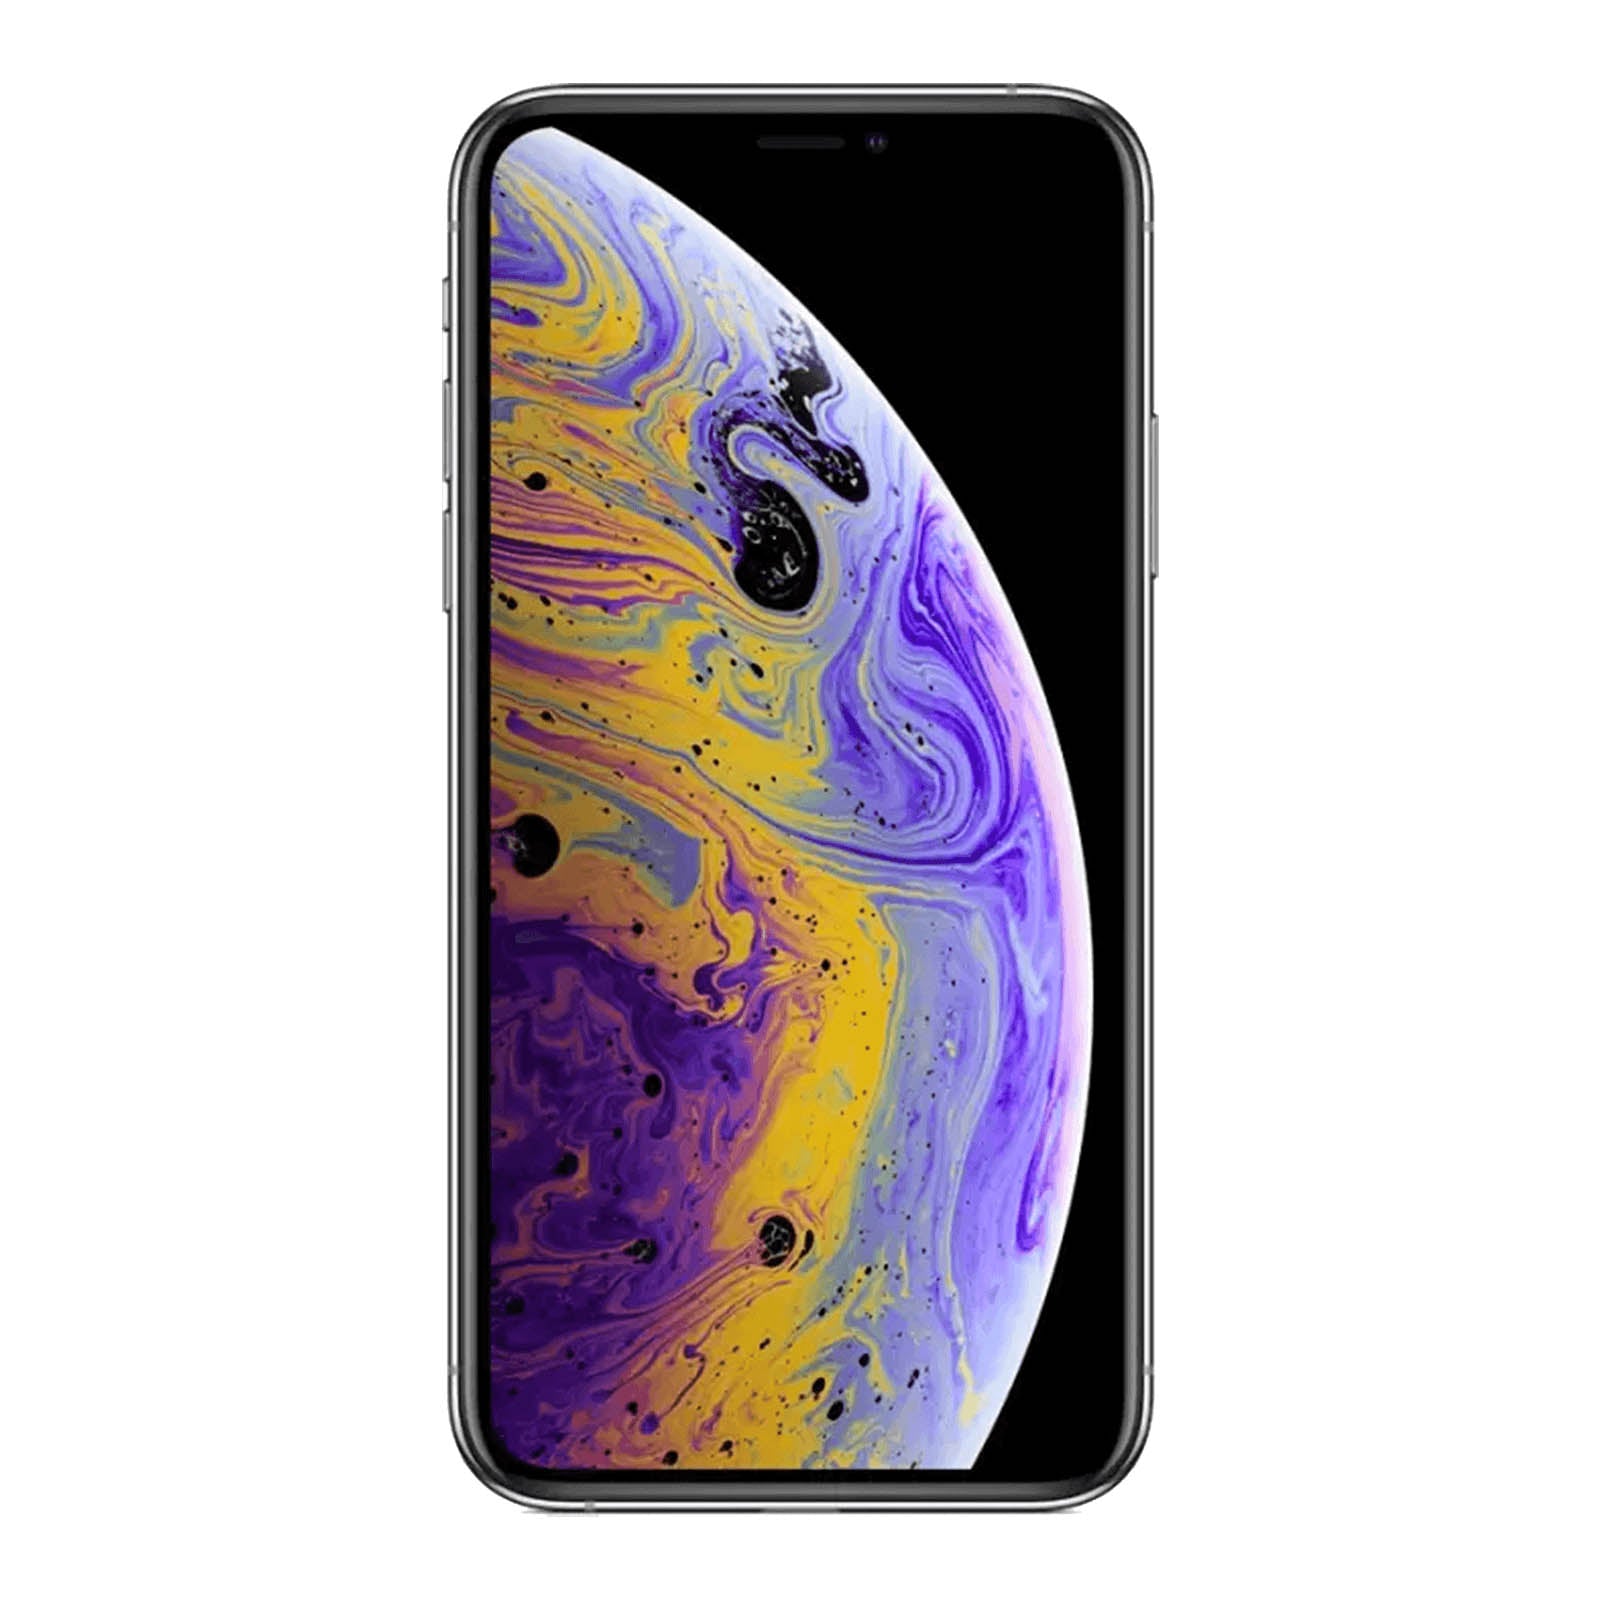 Apple iPhone XS Max 256GB Silver Good - AT&T